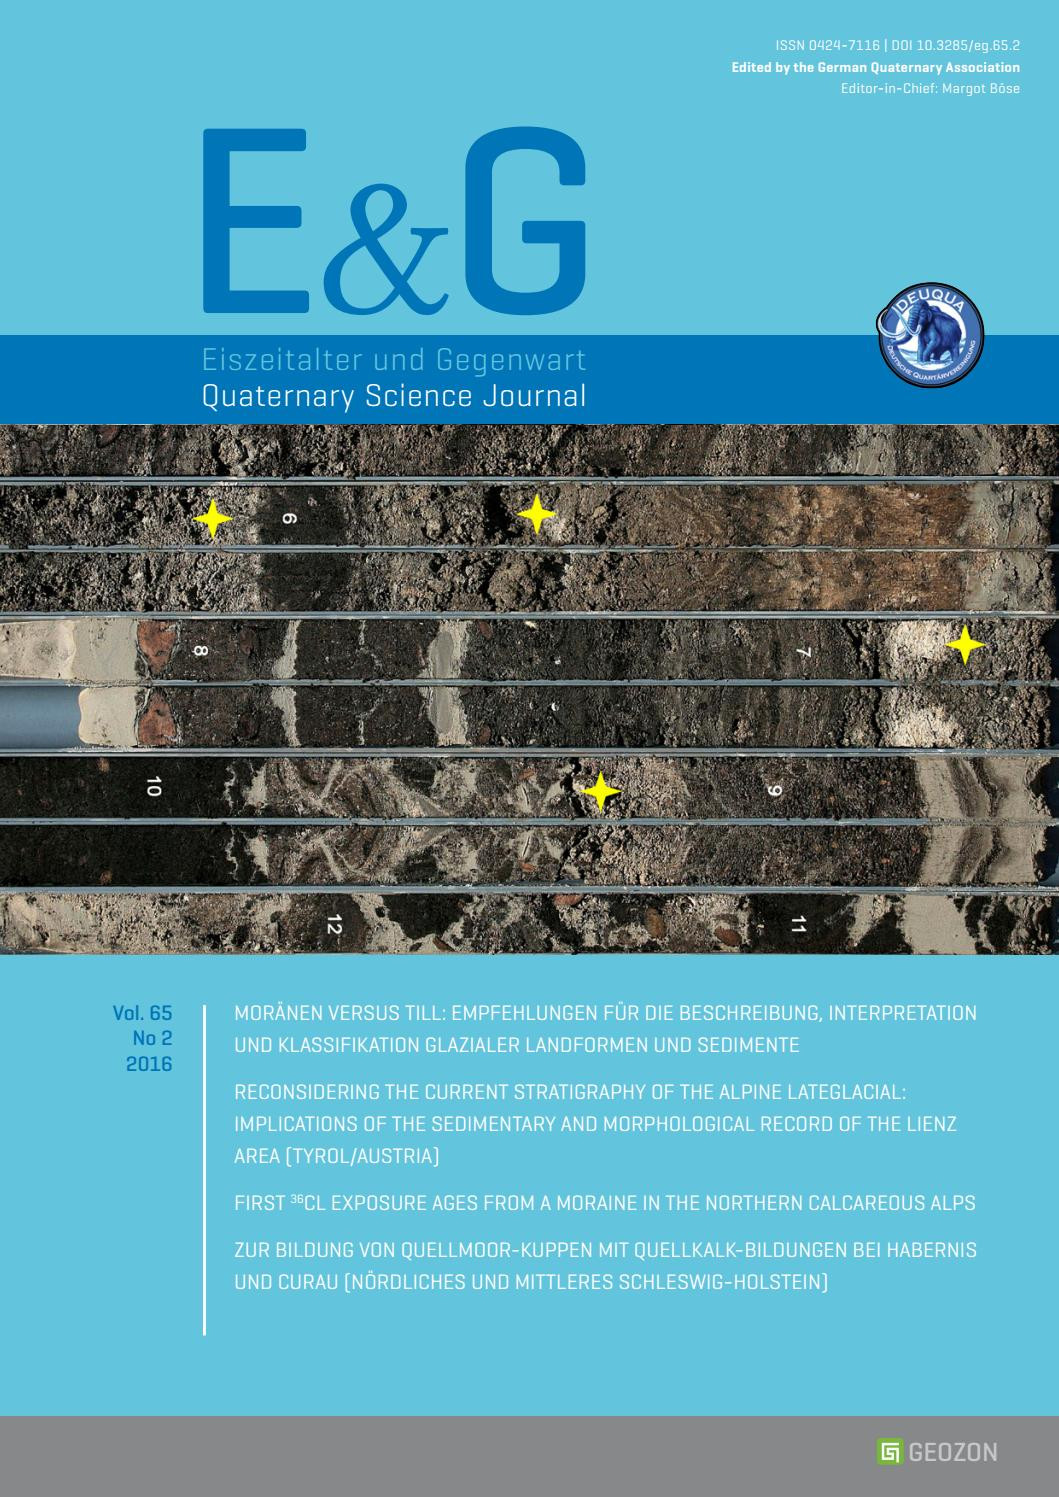 Outside Sales In the Aluminum Extrusions Resume Sample E&g â Quaternary Science Journal – Vol. 65 No 2 by Geozon …